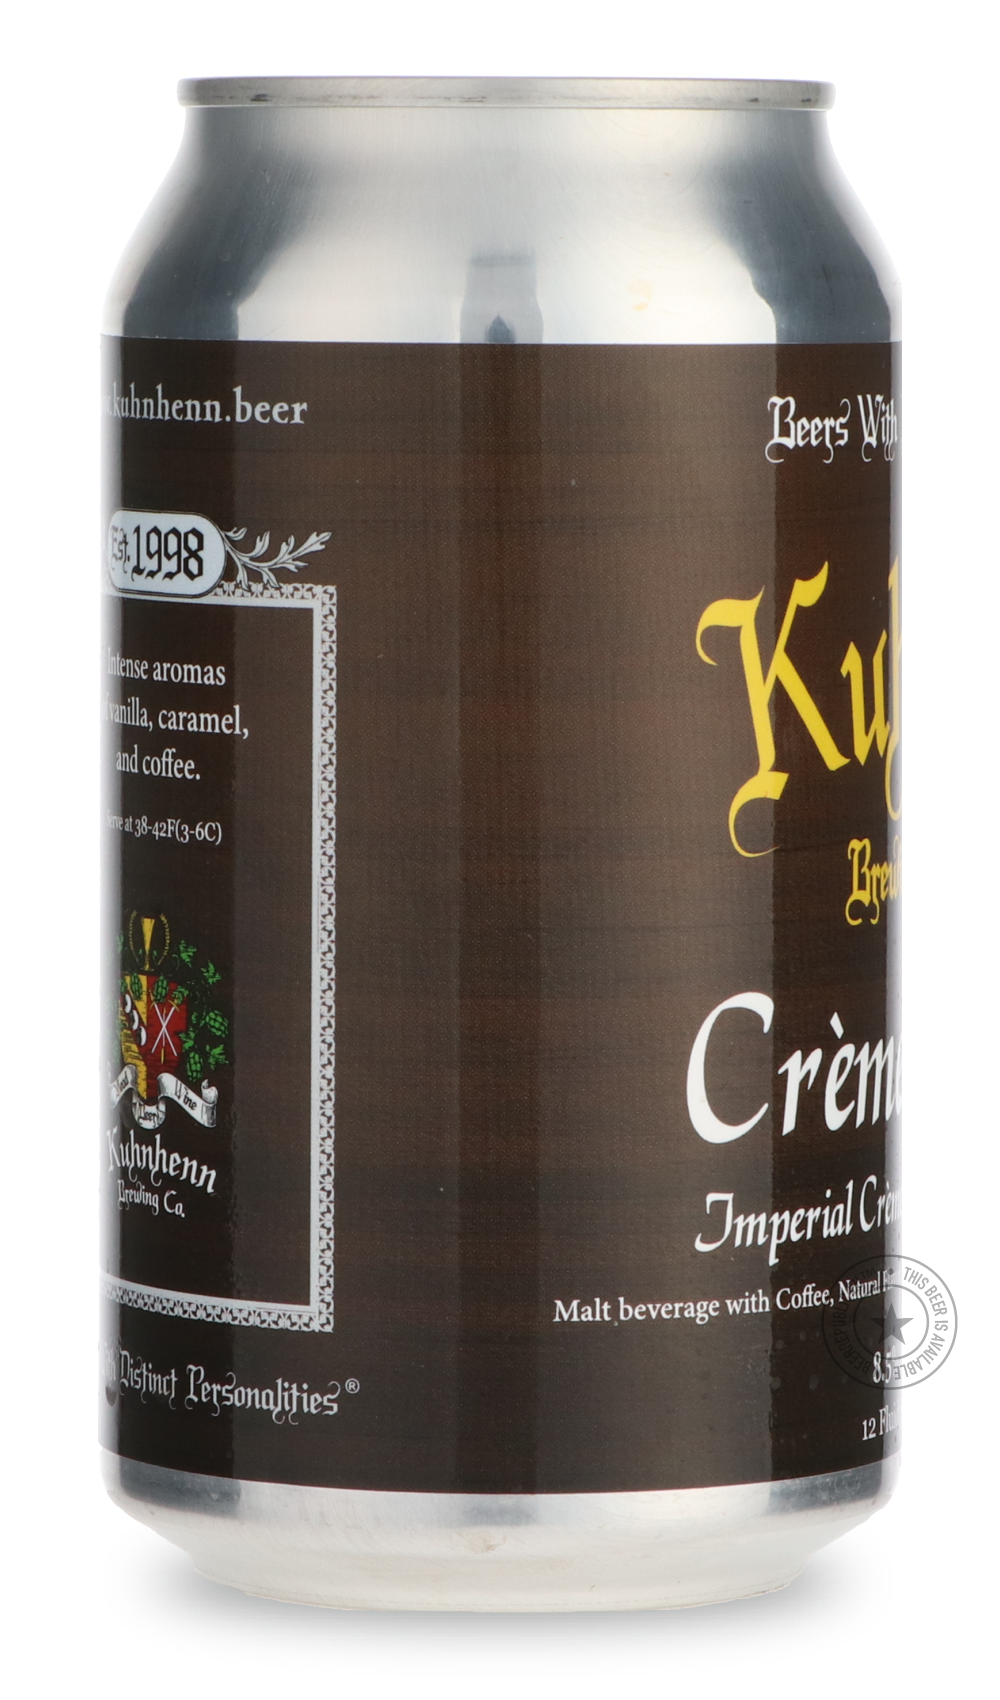 -Kuhnhenn- Imperial Crème Brûlée Java Stout-Stout & Porter- Only @ Beer Republic - The best online beer store for American & Canadian craft beer - Buy beer online from the USA and Canada - Bier online kopen - Amerikaans bier kopen - Craft beer store - Craft beer kopen - Amerikanisch bier kaufen - Bier online kaufen - Acheter biere online - IPA - Stout - Porter - New England IPA - Hazy IPA - Imperial Stout - Barrel Aged - Barrel Aged Imperial Stout - Brown - Dark beer - Blond - Blonde - Pilsner - Lager - Whe